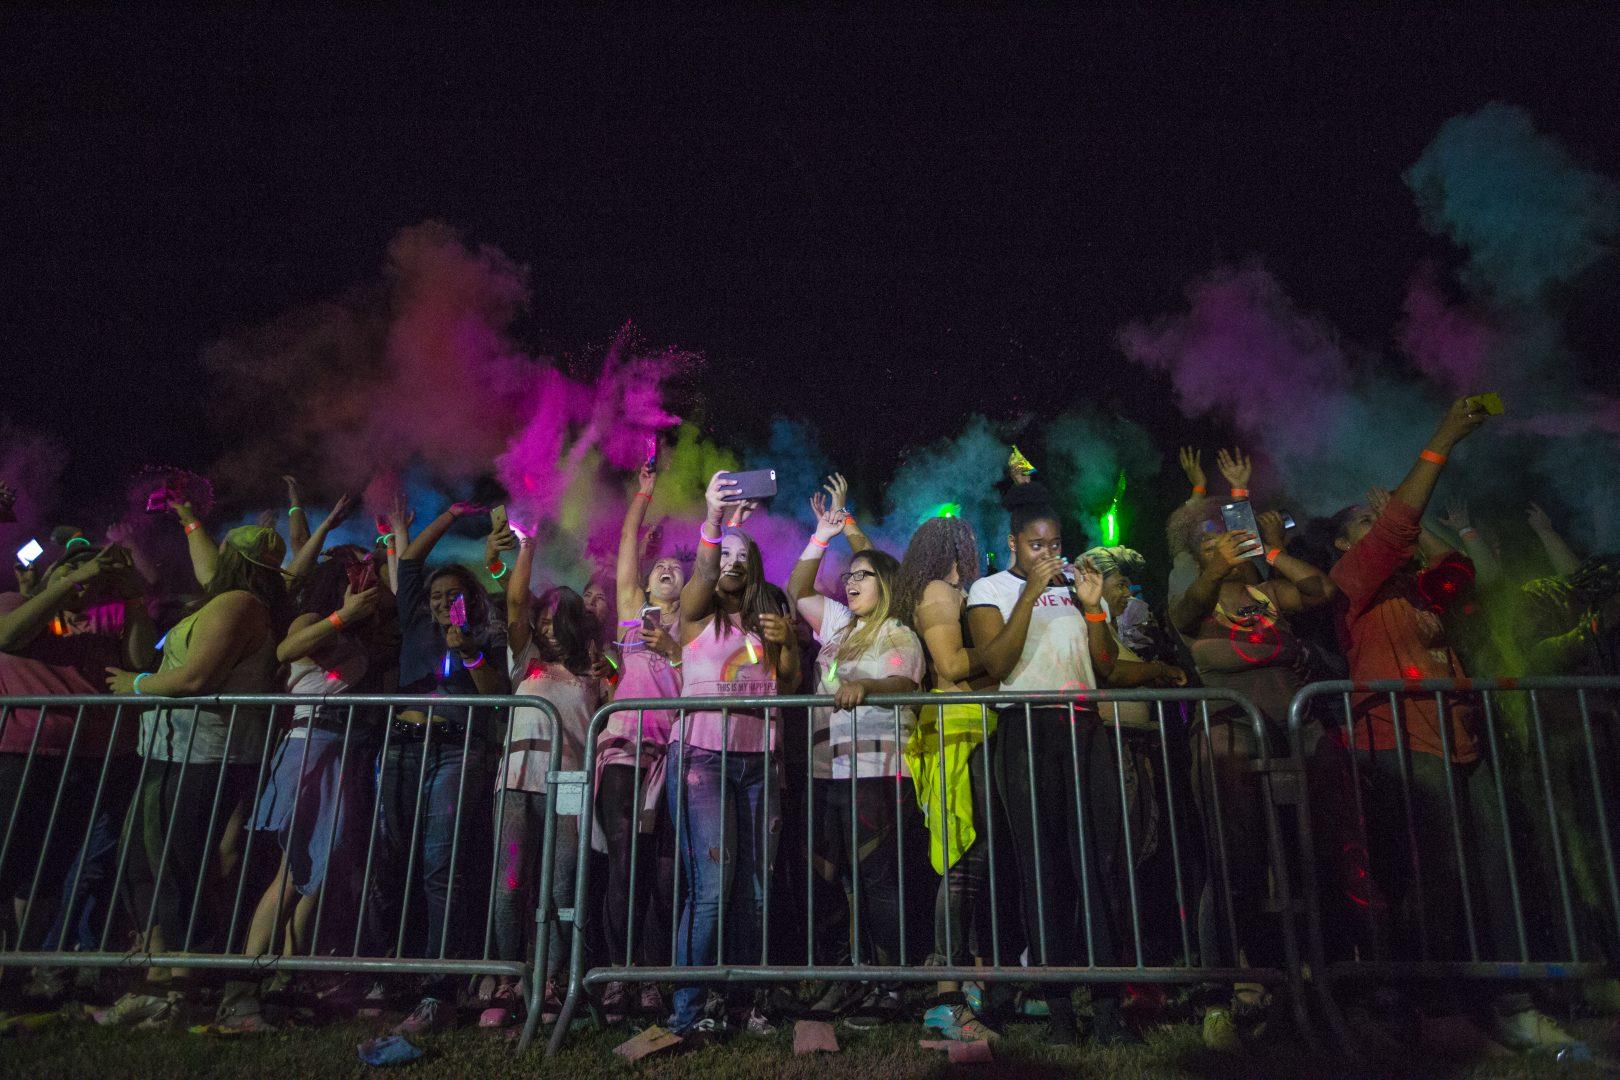 : Participants throw paint into the air during the Vintage Days Paint Party on campus Friday night, April 21, 2017. (Khone Saysamongdy/ The Collegian)